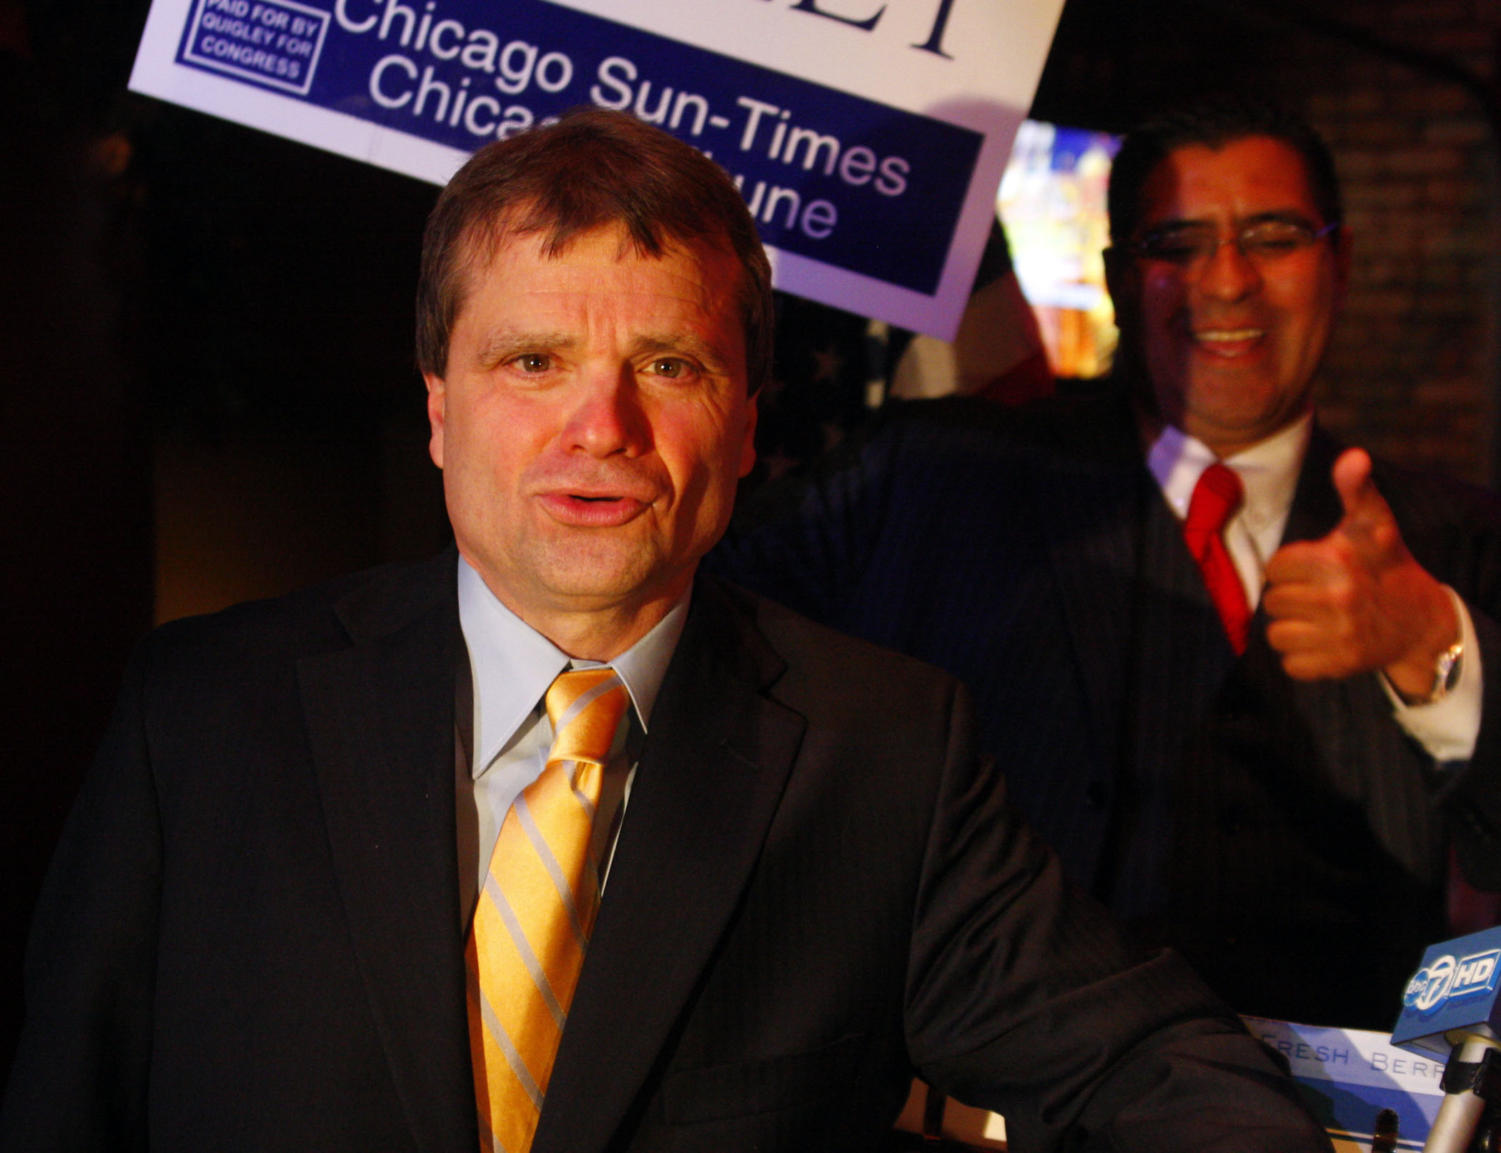 Mike Quigley breathes a sigh of relief after his victory speech for Illinois's 5th Congressional District Democrat primary Tuesday night at the Red Ivy bar and restaurant in Wrigleyville.